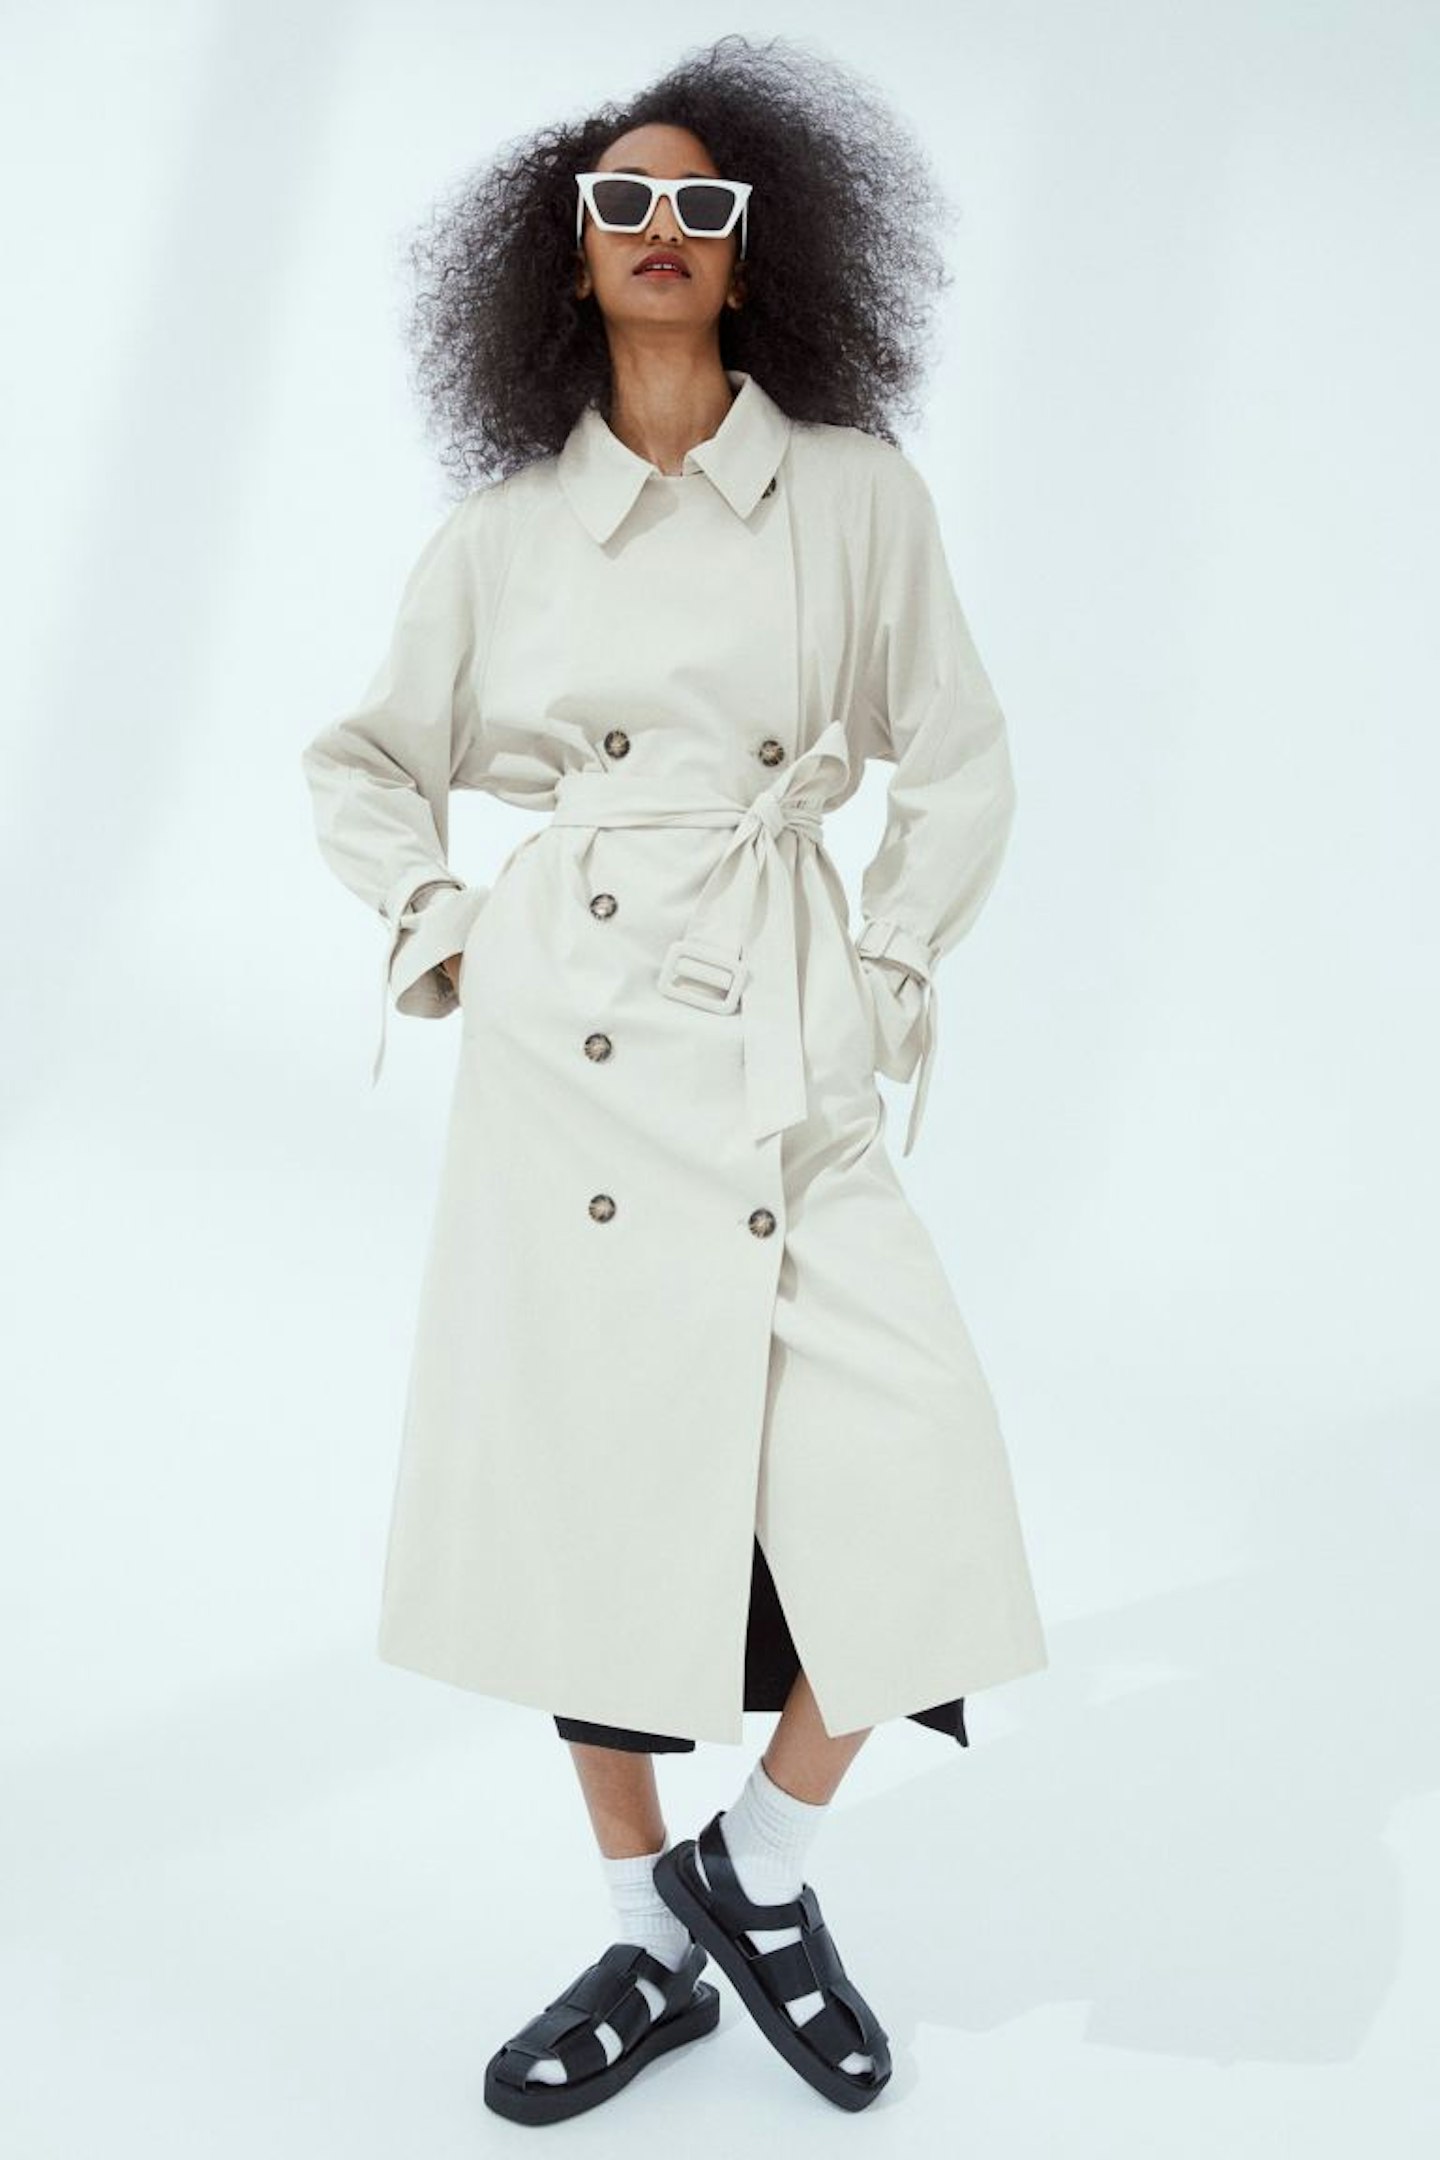 Tuesday – H&M, Trenchcoat, £39.99